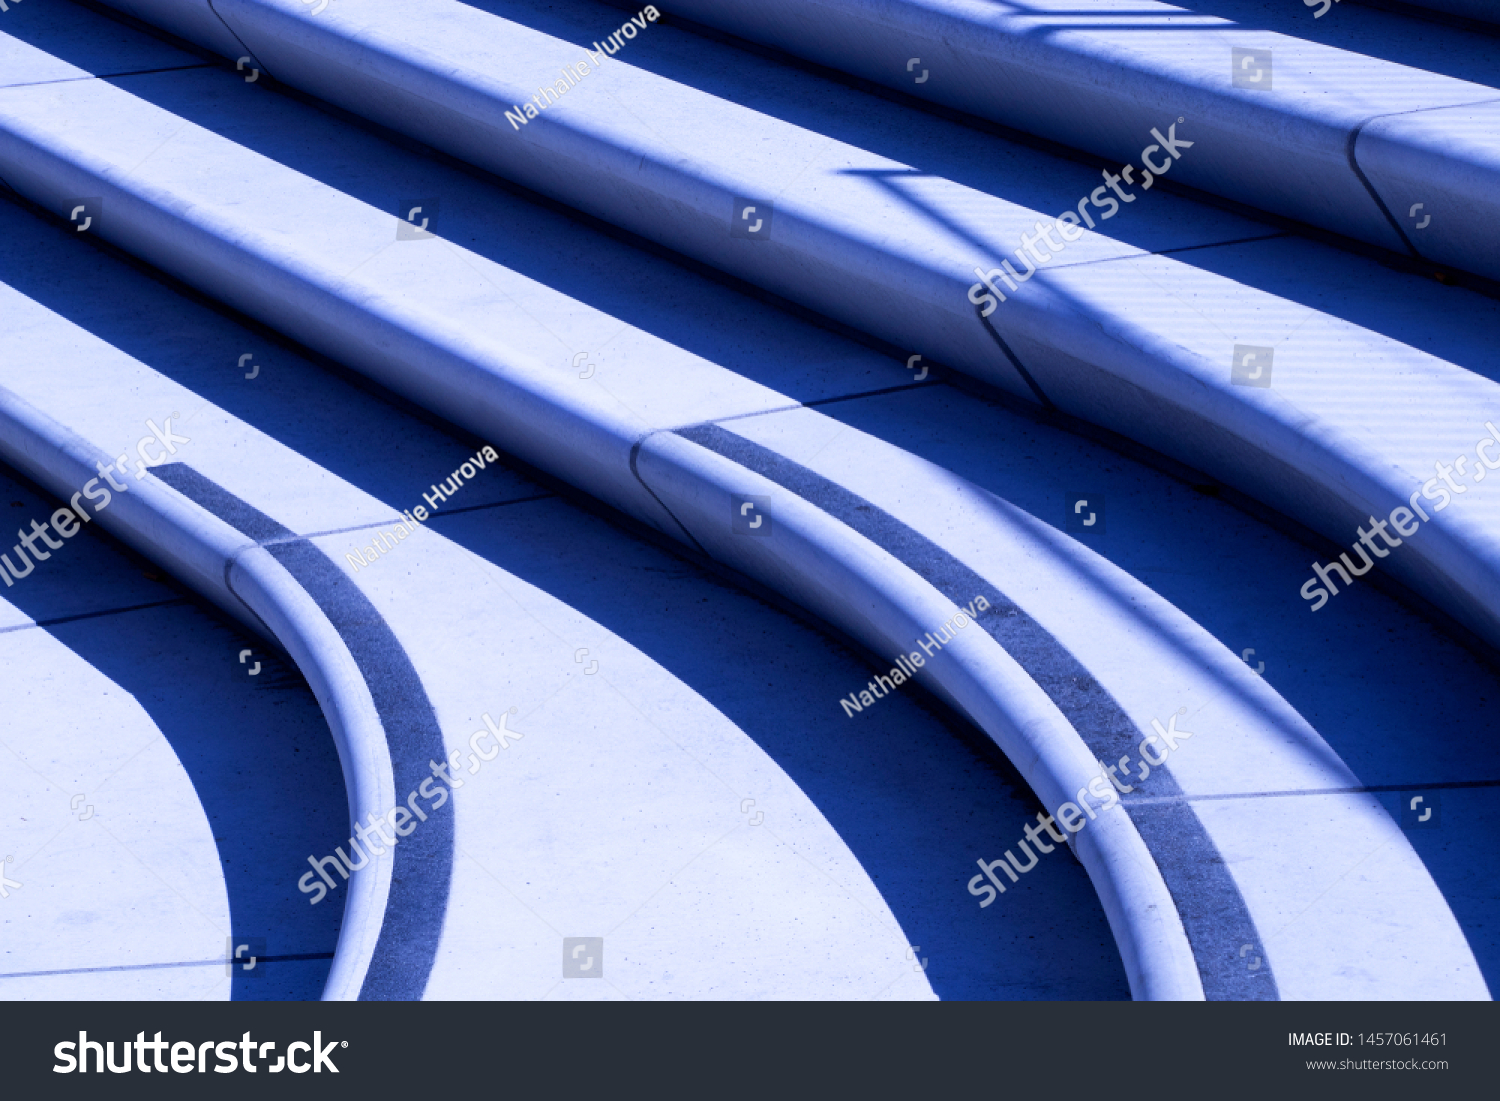 Modern street stairs in a blue color. A picture close-up. Outdoor design. Urban architecture. Bright background.  #1457061461